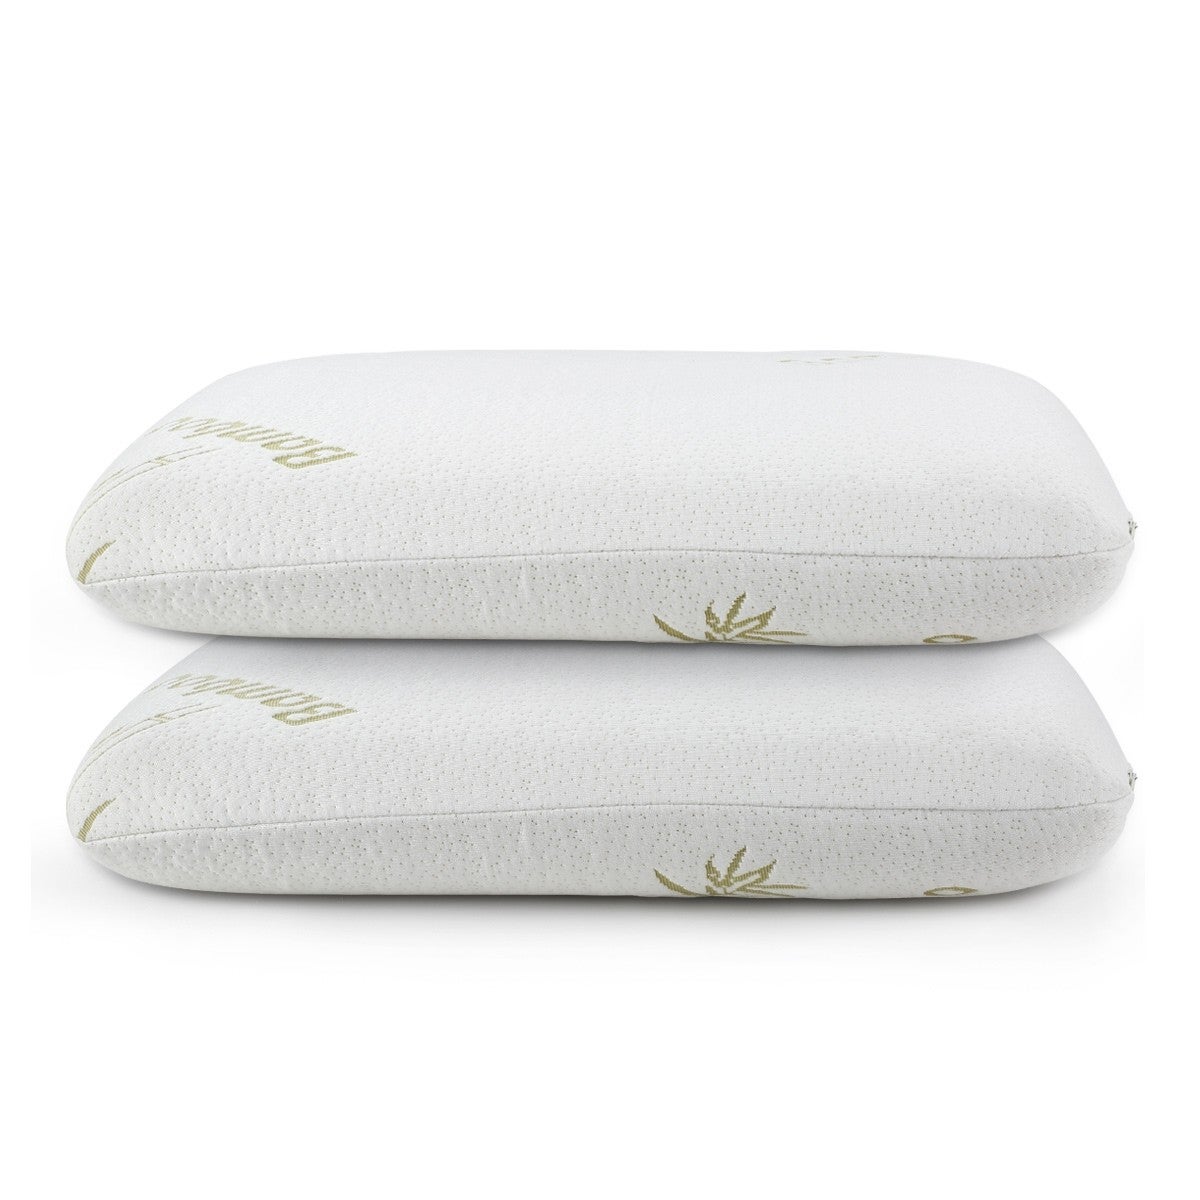 2 Luxdream Queen Size Memory Foam Pillow With Bamboo Cover